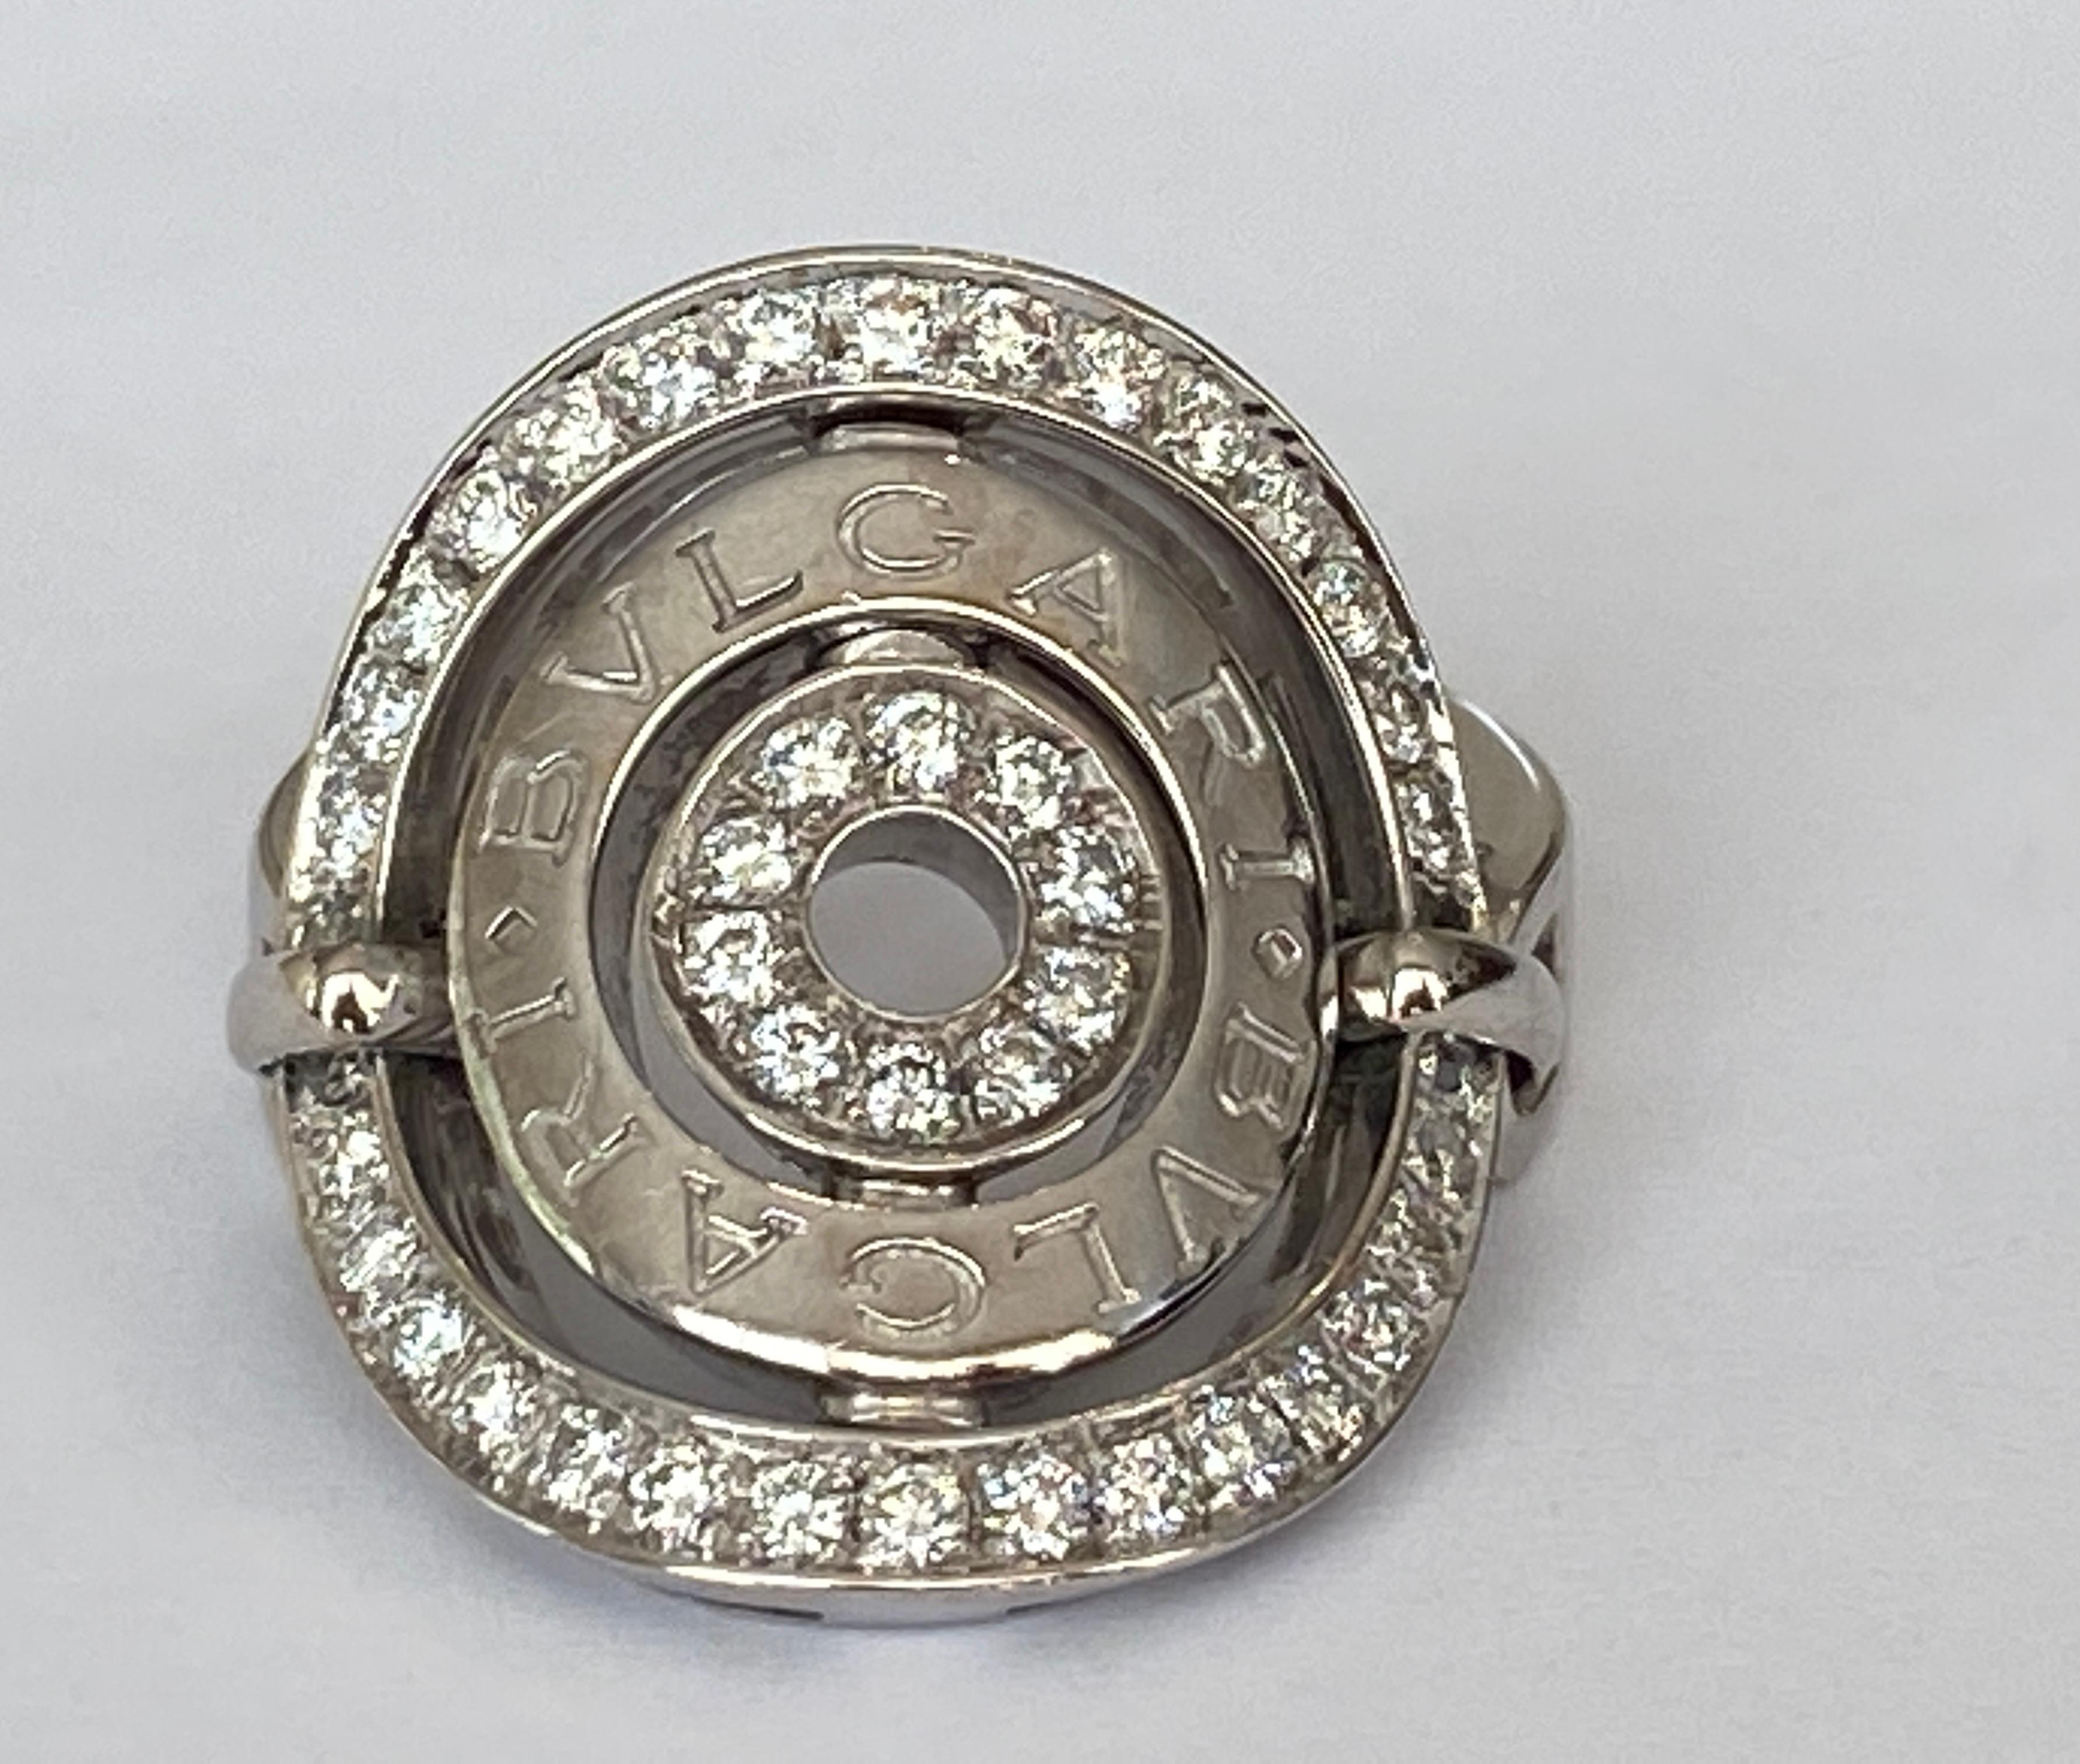 Offered 18k White Gold Astrale Cerchi Diamond Ring by Bulgari. The ring is surrounded with 44 round brilliant cut diamonds VS1 clarity G color total weight approx.0.80ct. With all hallmarks! 
Grade: 18 KT
Collection: Cerchi Astrale
Total weight: